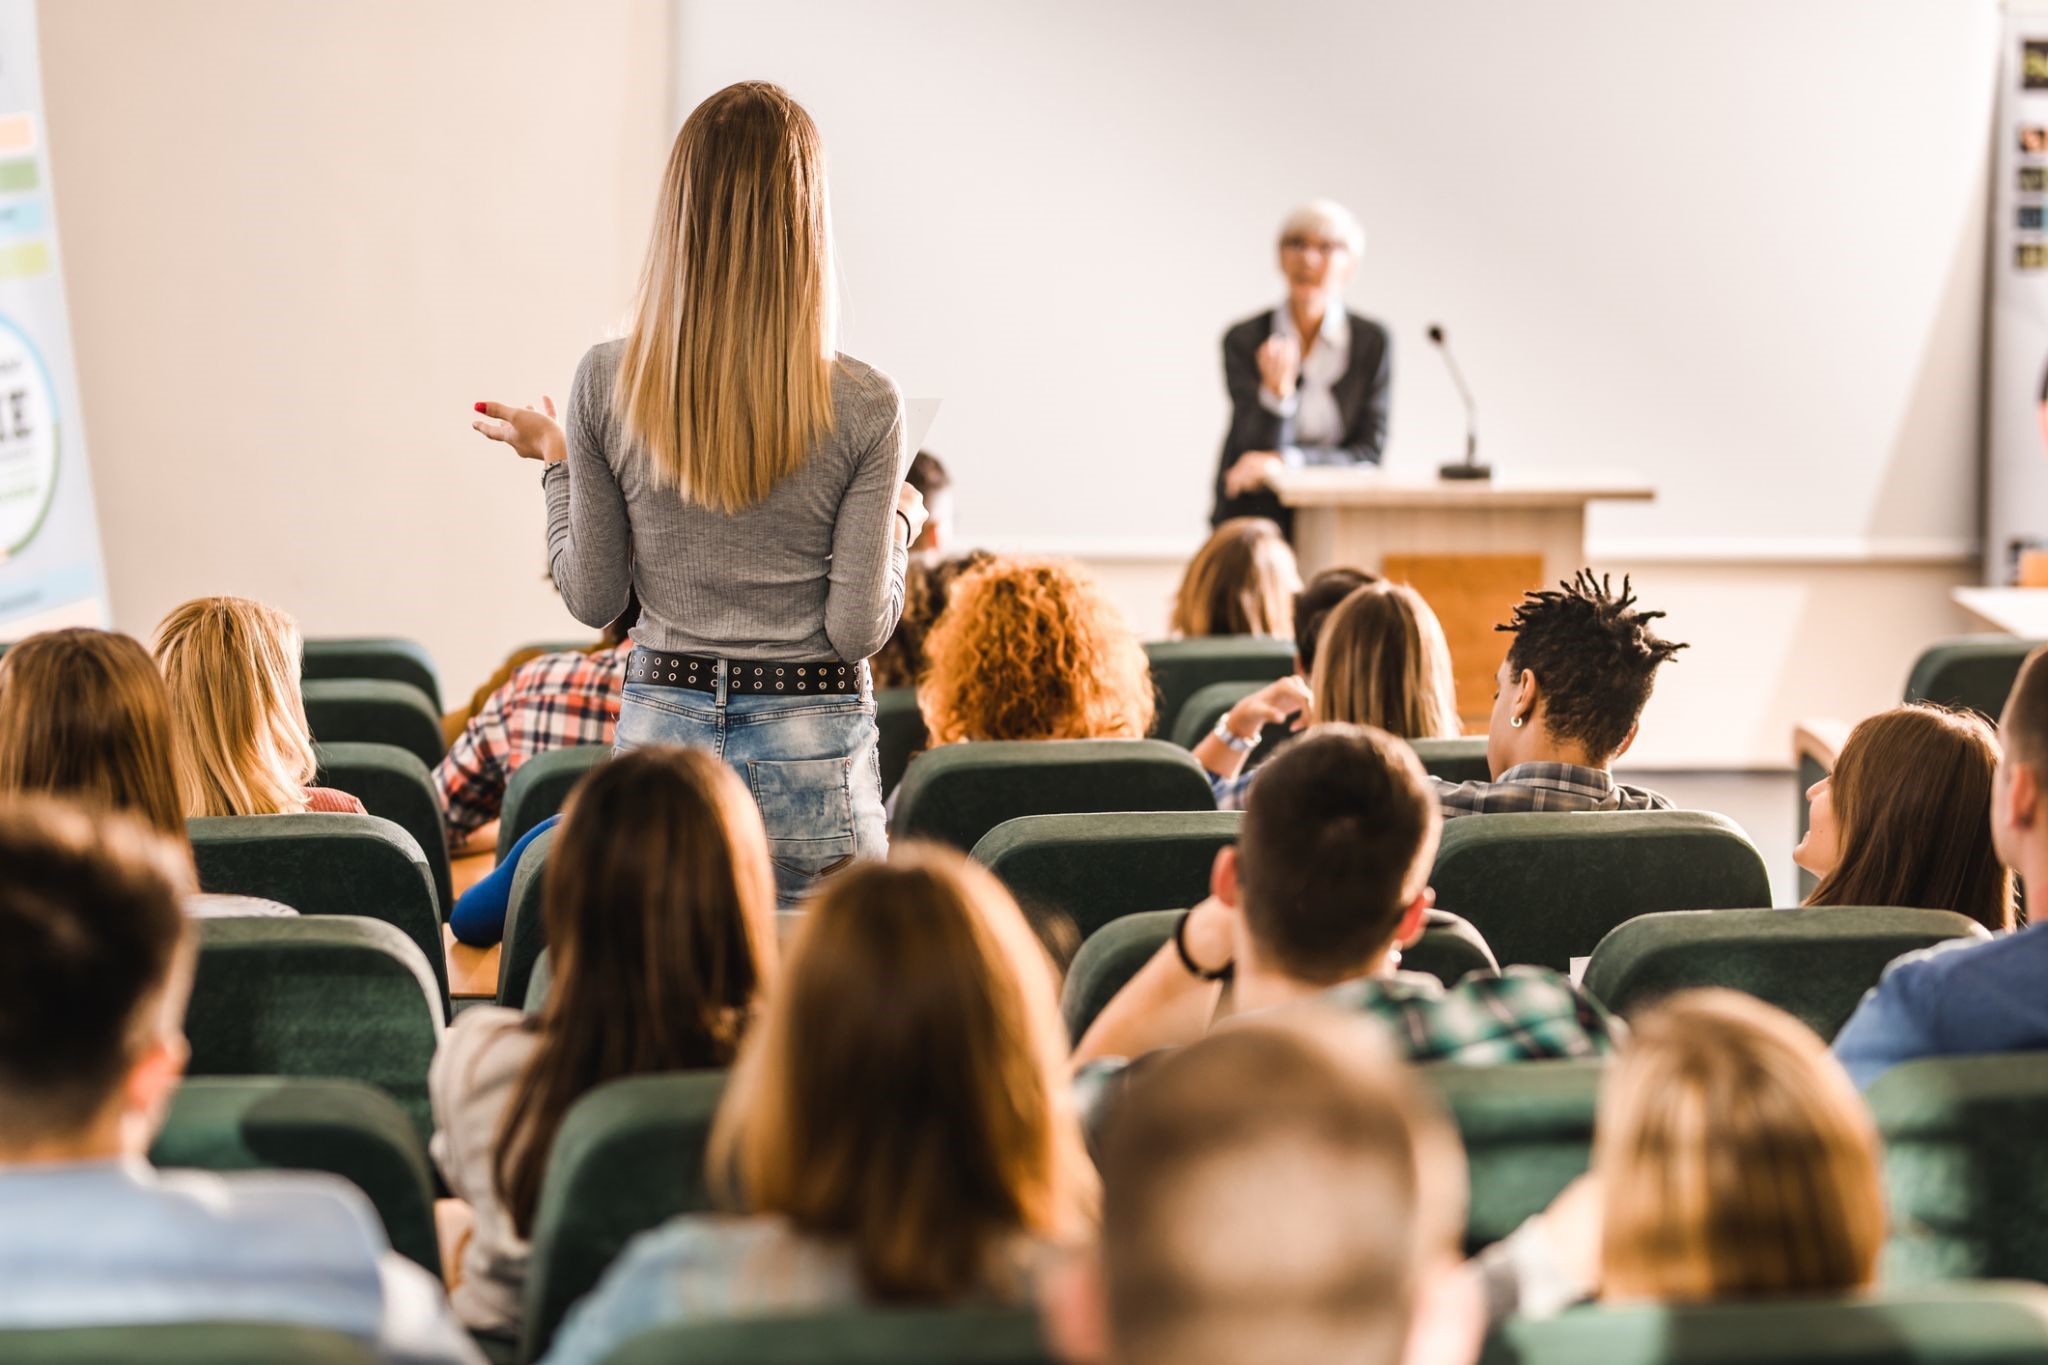 We see a female student standing up in a college classroom, asking her professor a question most likely pertaining to the servicenow platform.